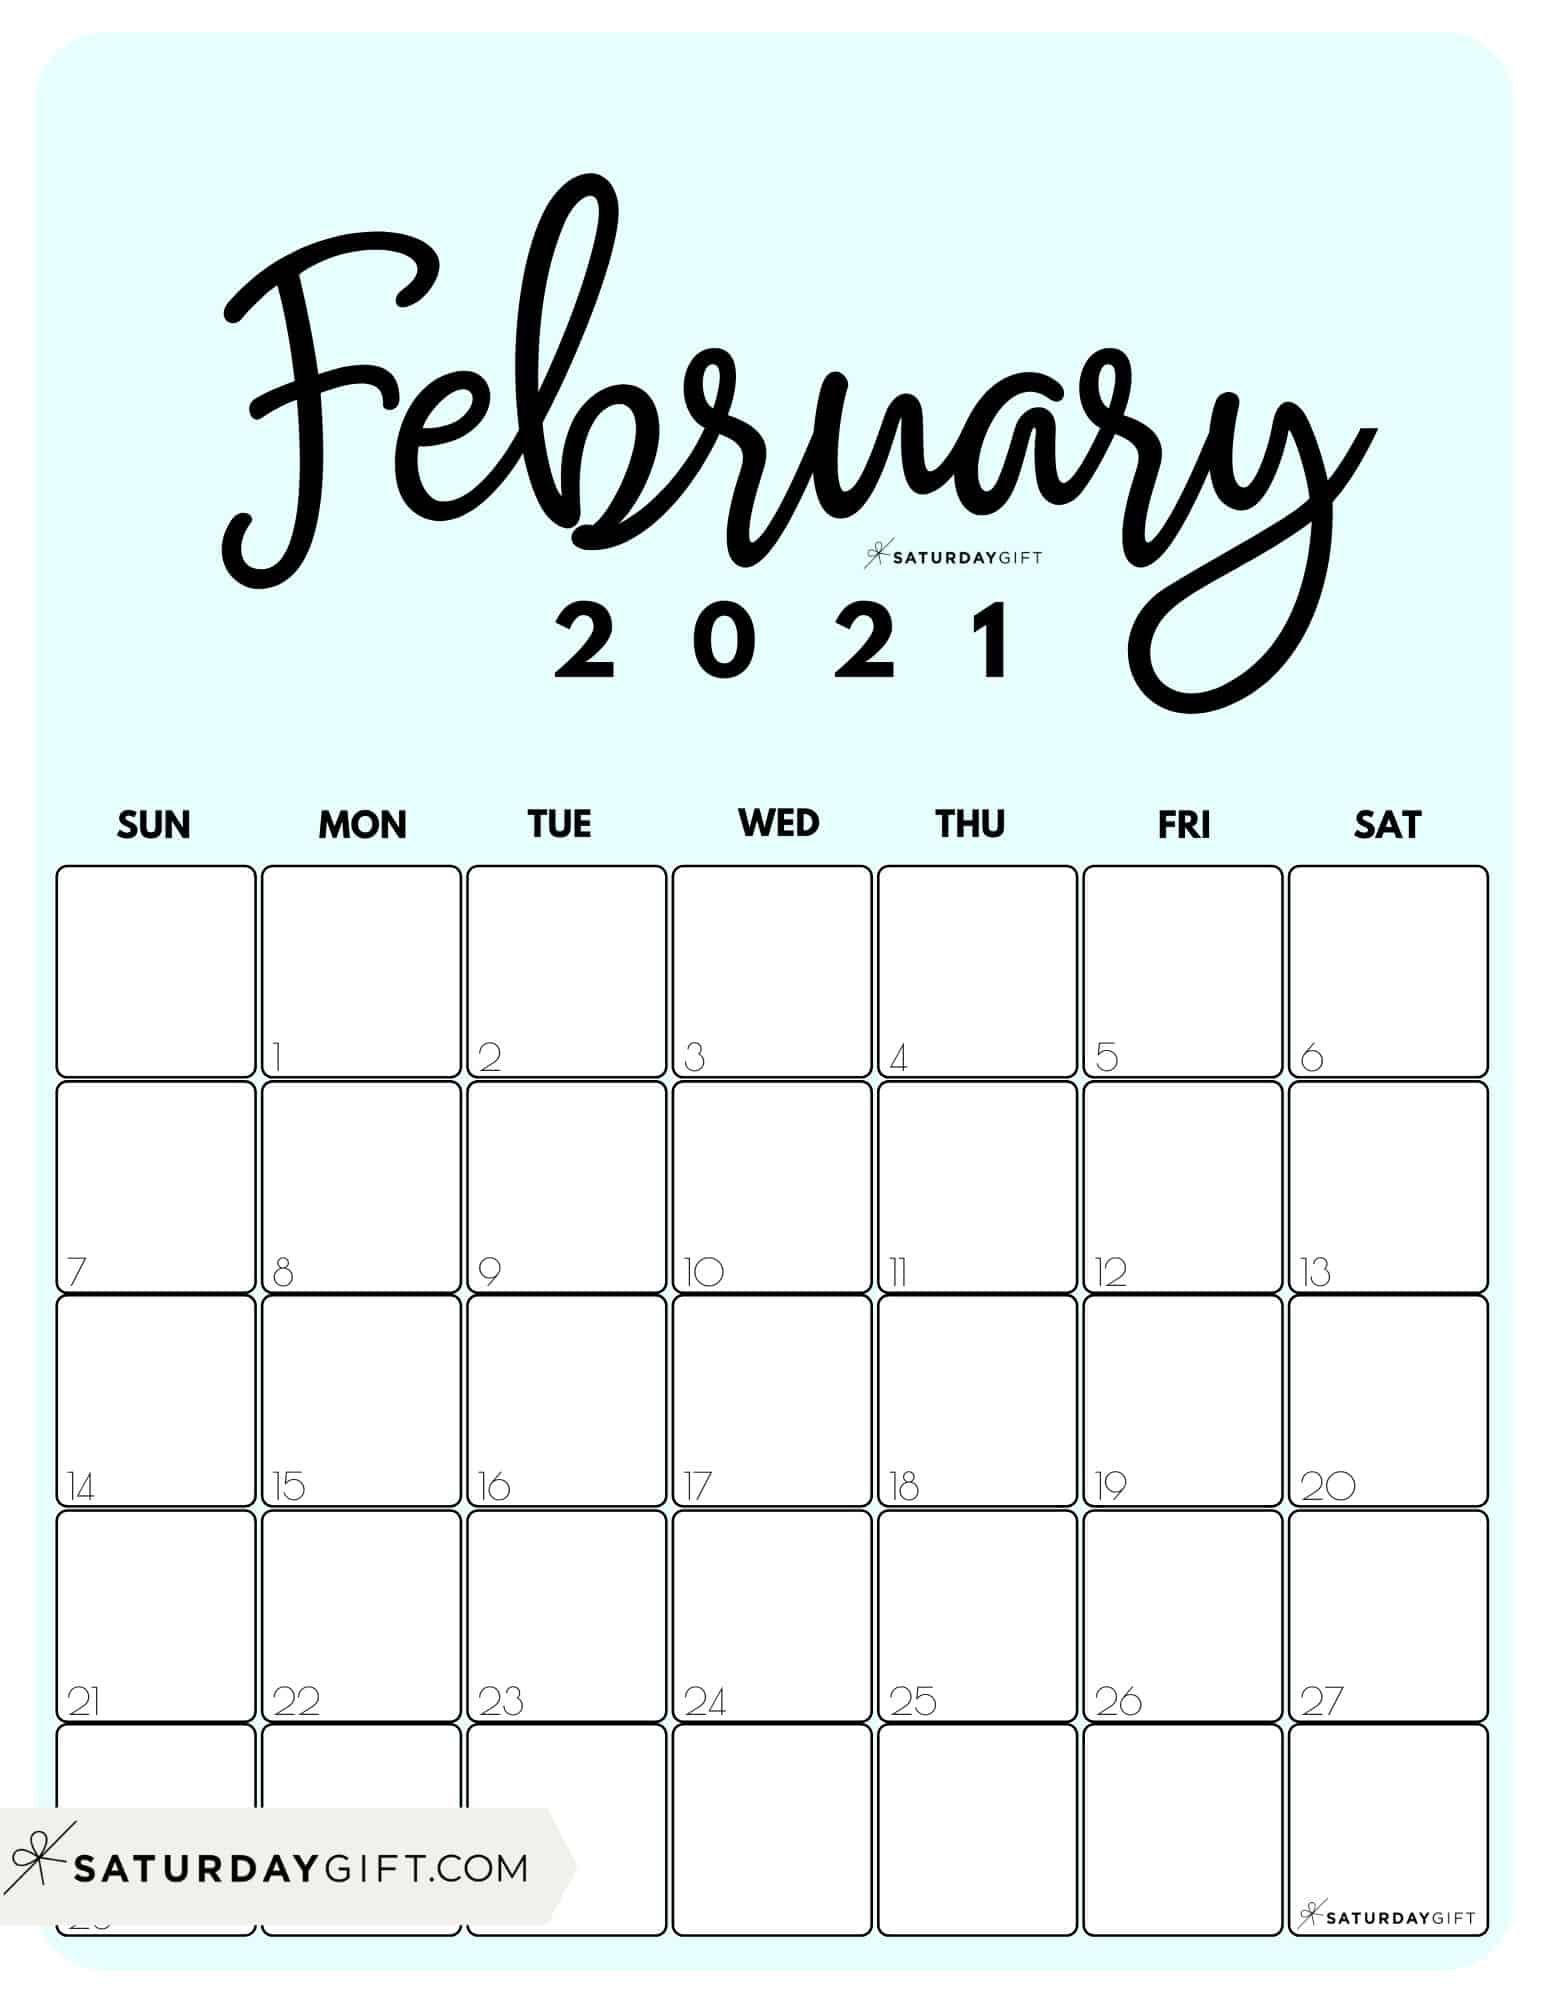 30 Free February 2021 Calendars For Home Or Office Onedesblog Cute july 2021 calendar printable design ideas free download to decorate walls & other things. 30 free february 2021 calendars for